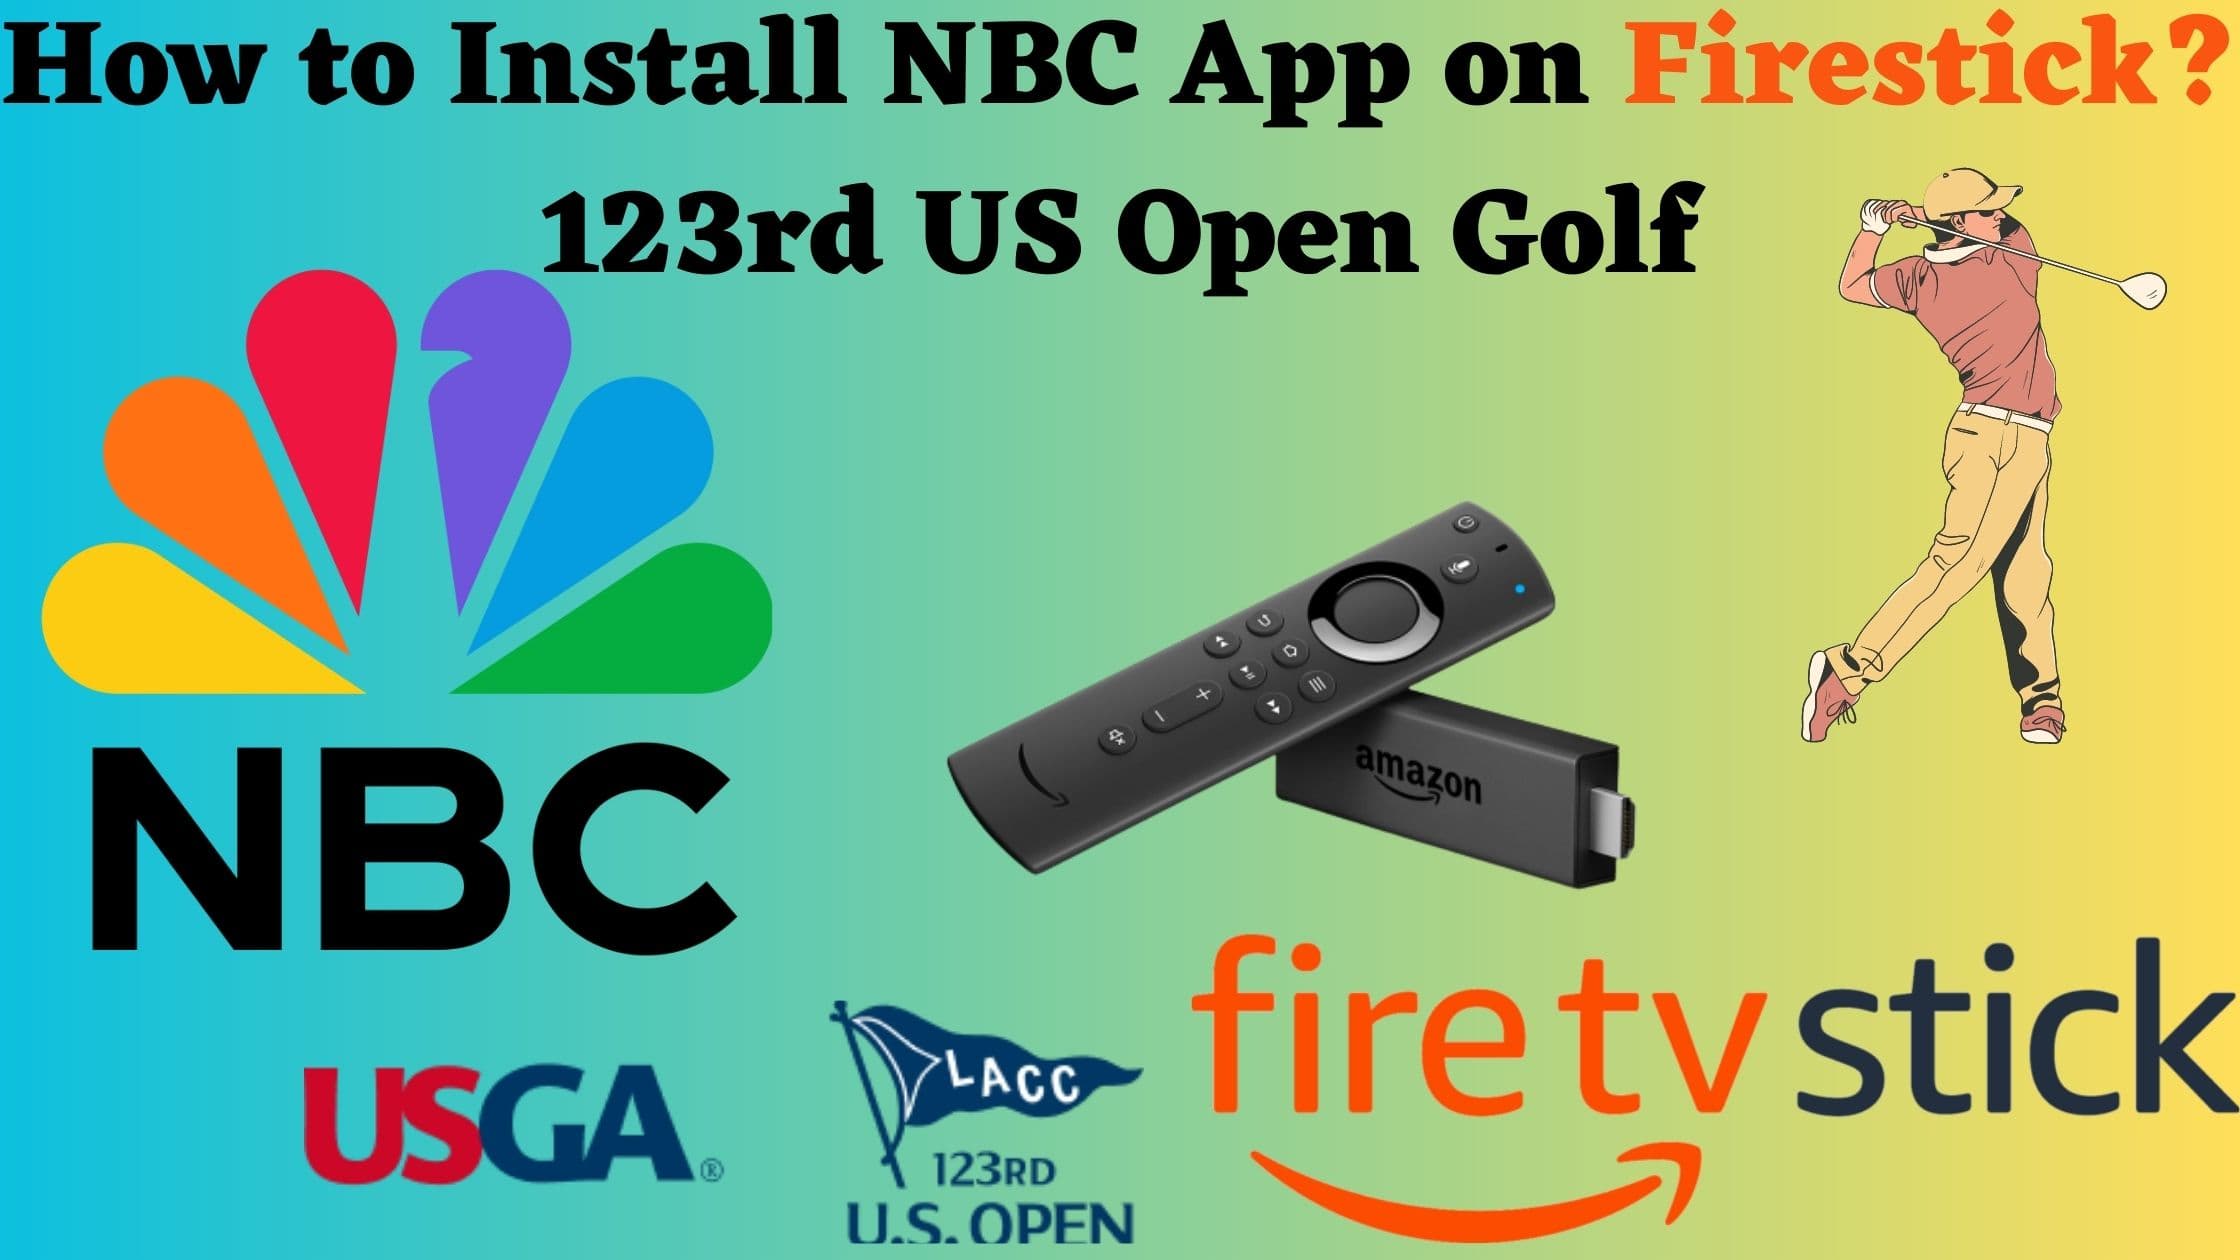 How to Install NBC App on Firestick